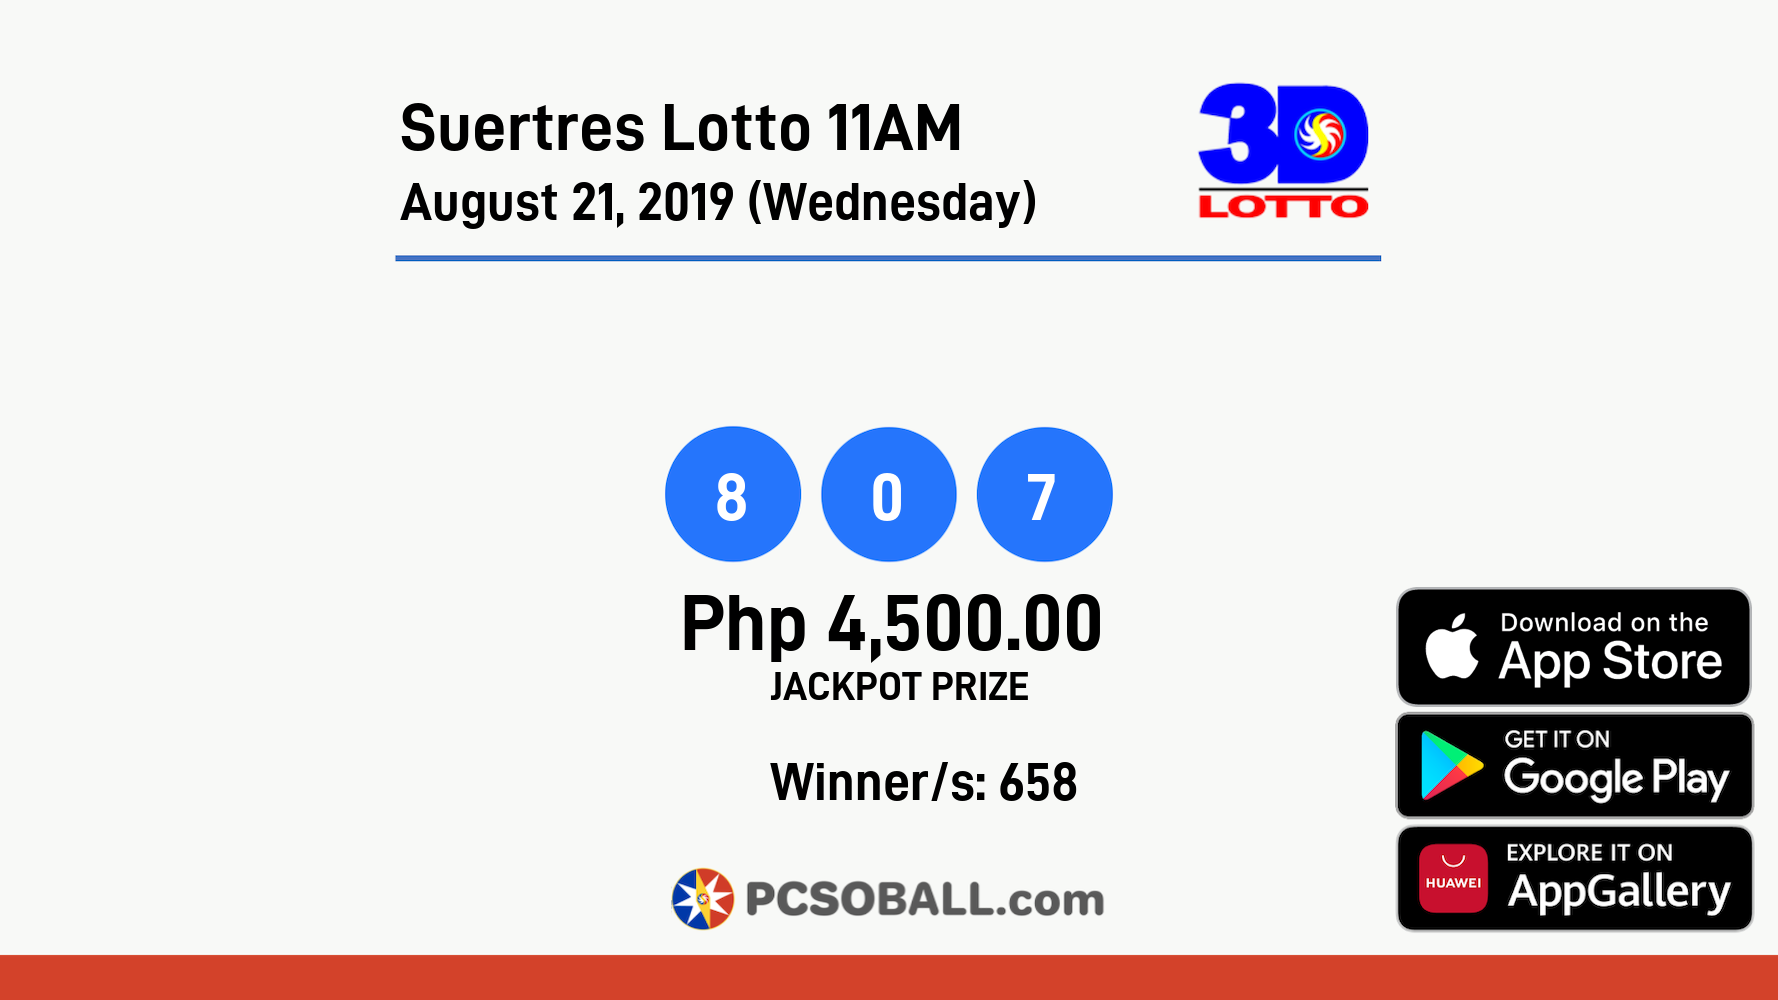 Suertres Lotto 11AM August 21, 2019 (Wednesday) Result